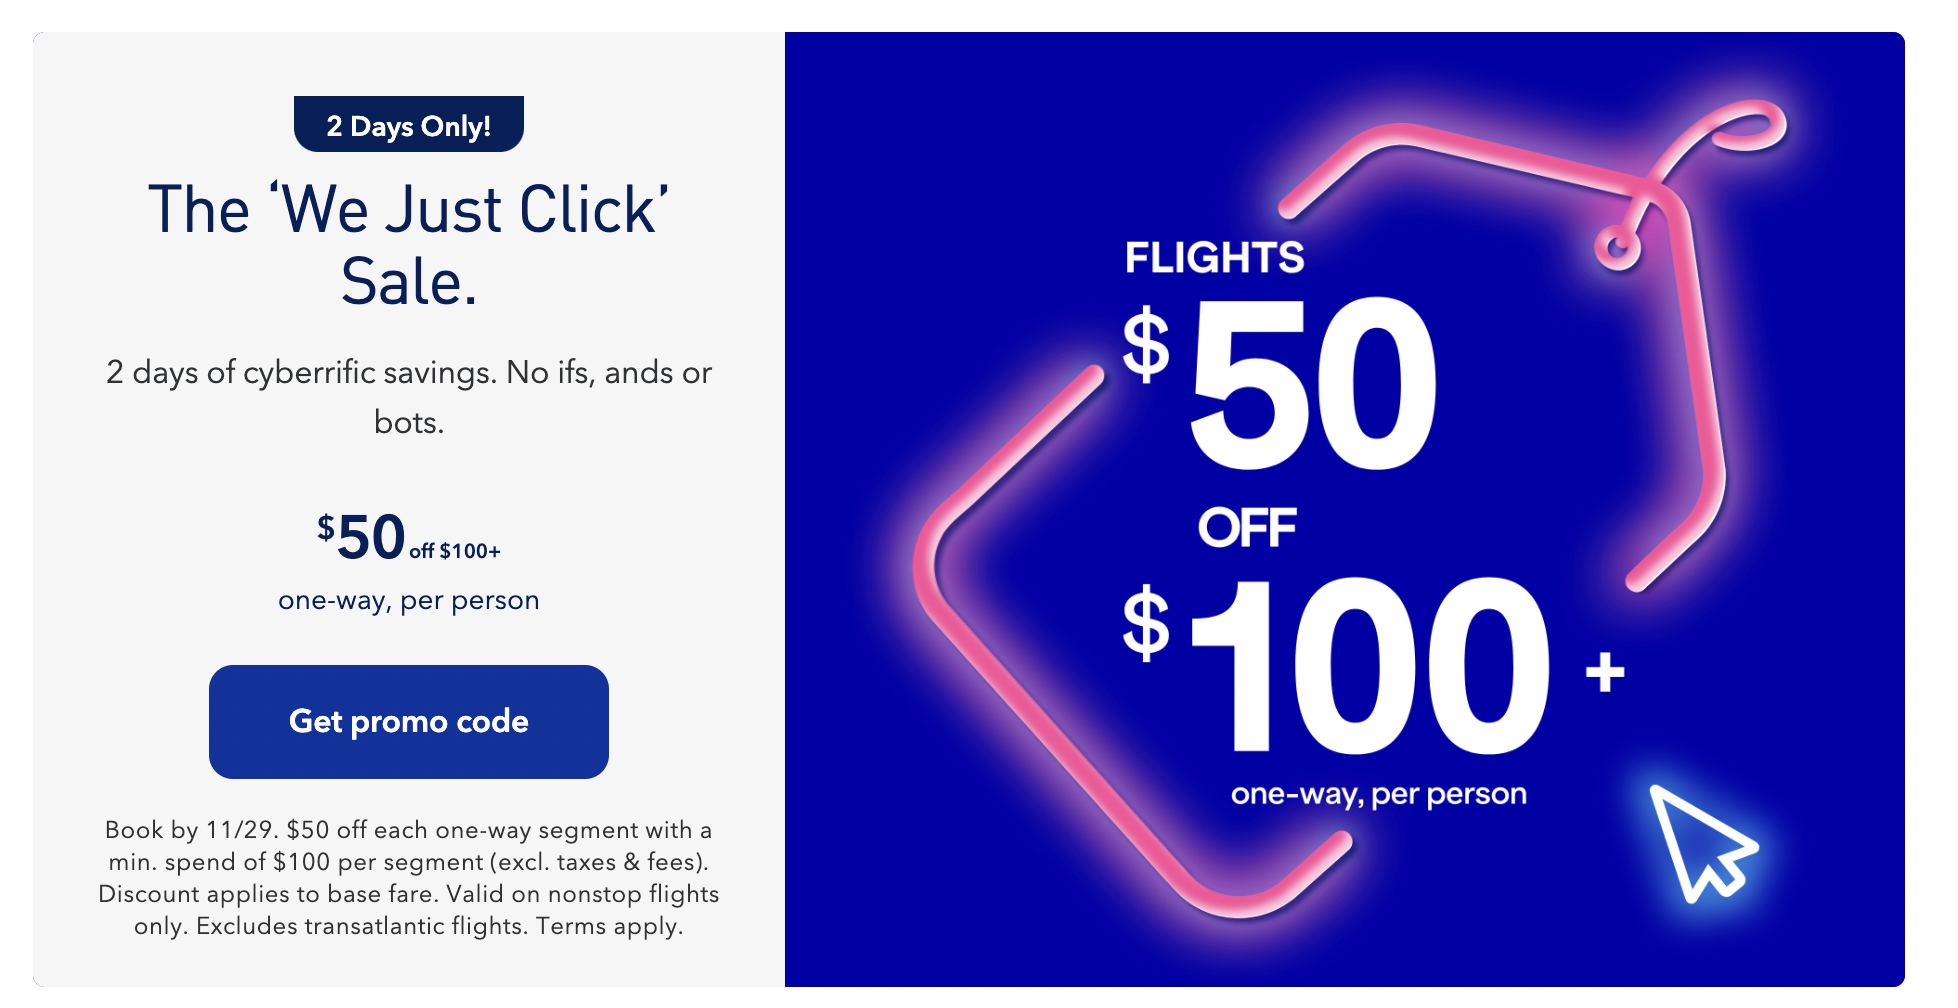 JetBlue Cyber Monday promo get 50 off flights 100+ for Cyber Monday